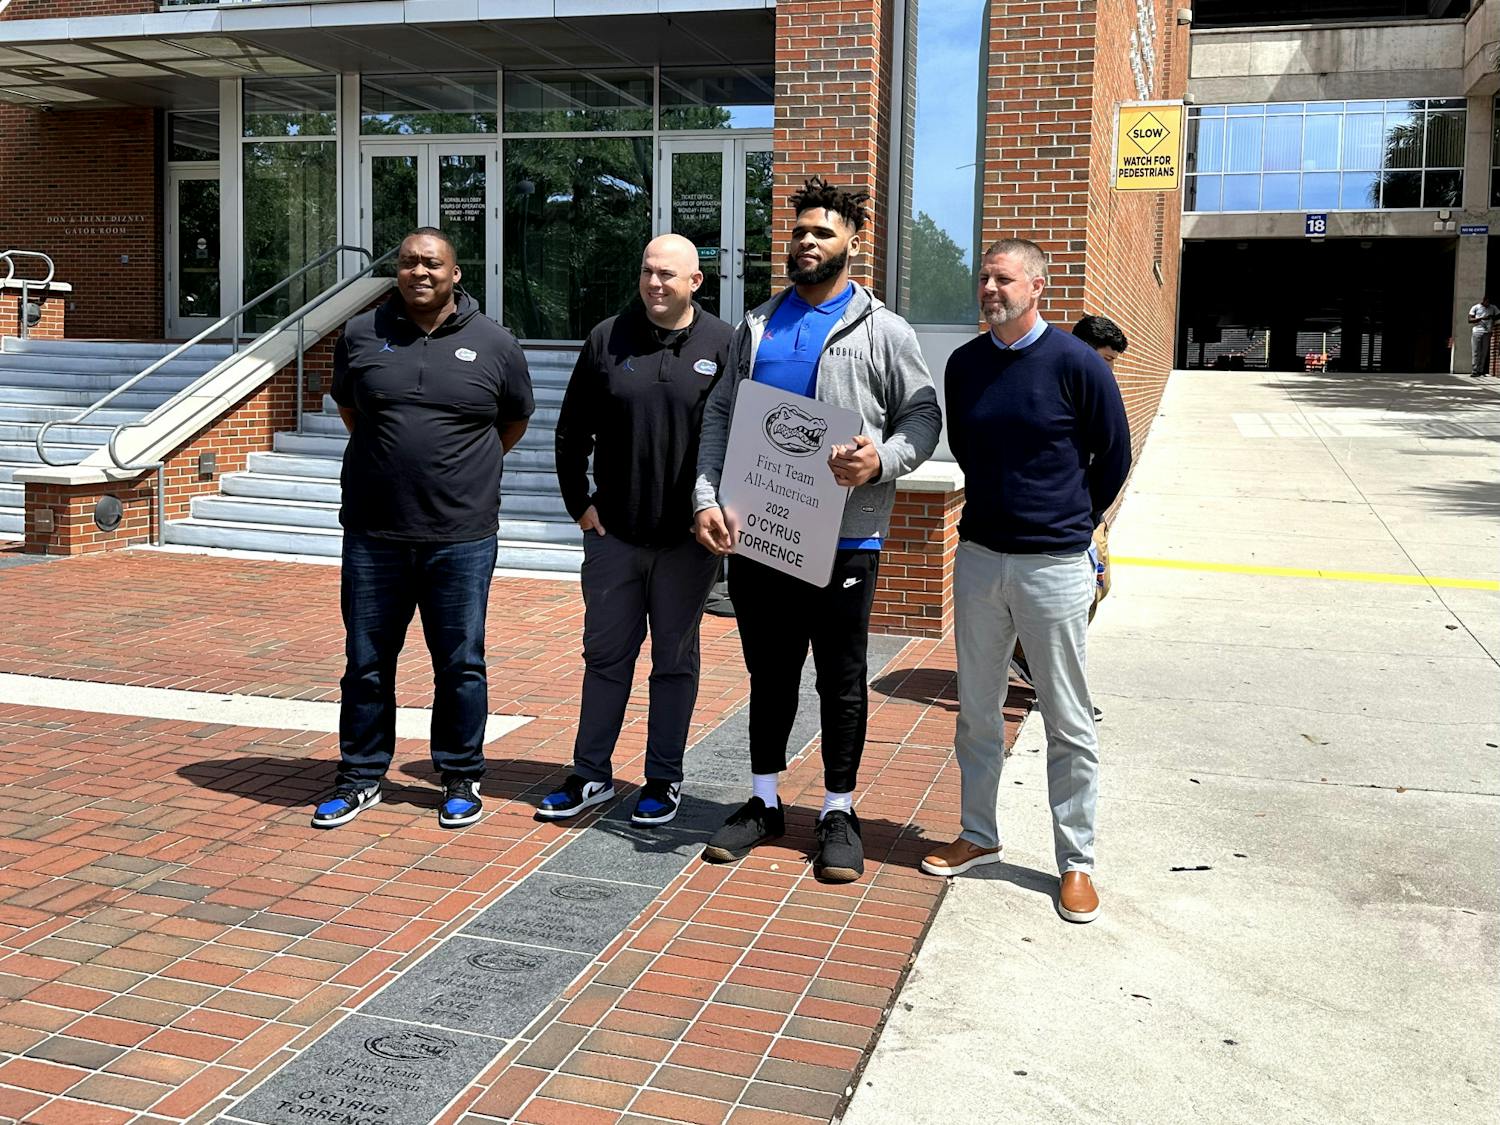 Former Gators offensive guard O'Cyrus Torrence receives his All-American brick alongside UF assistant coaches Darnell Stapleton and Rob Sale, and head coach Billy Napier on Wednesday, March 29, 2023. 